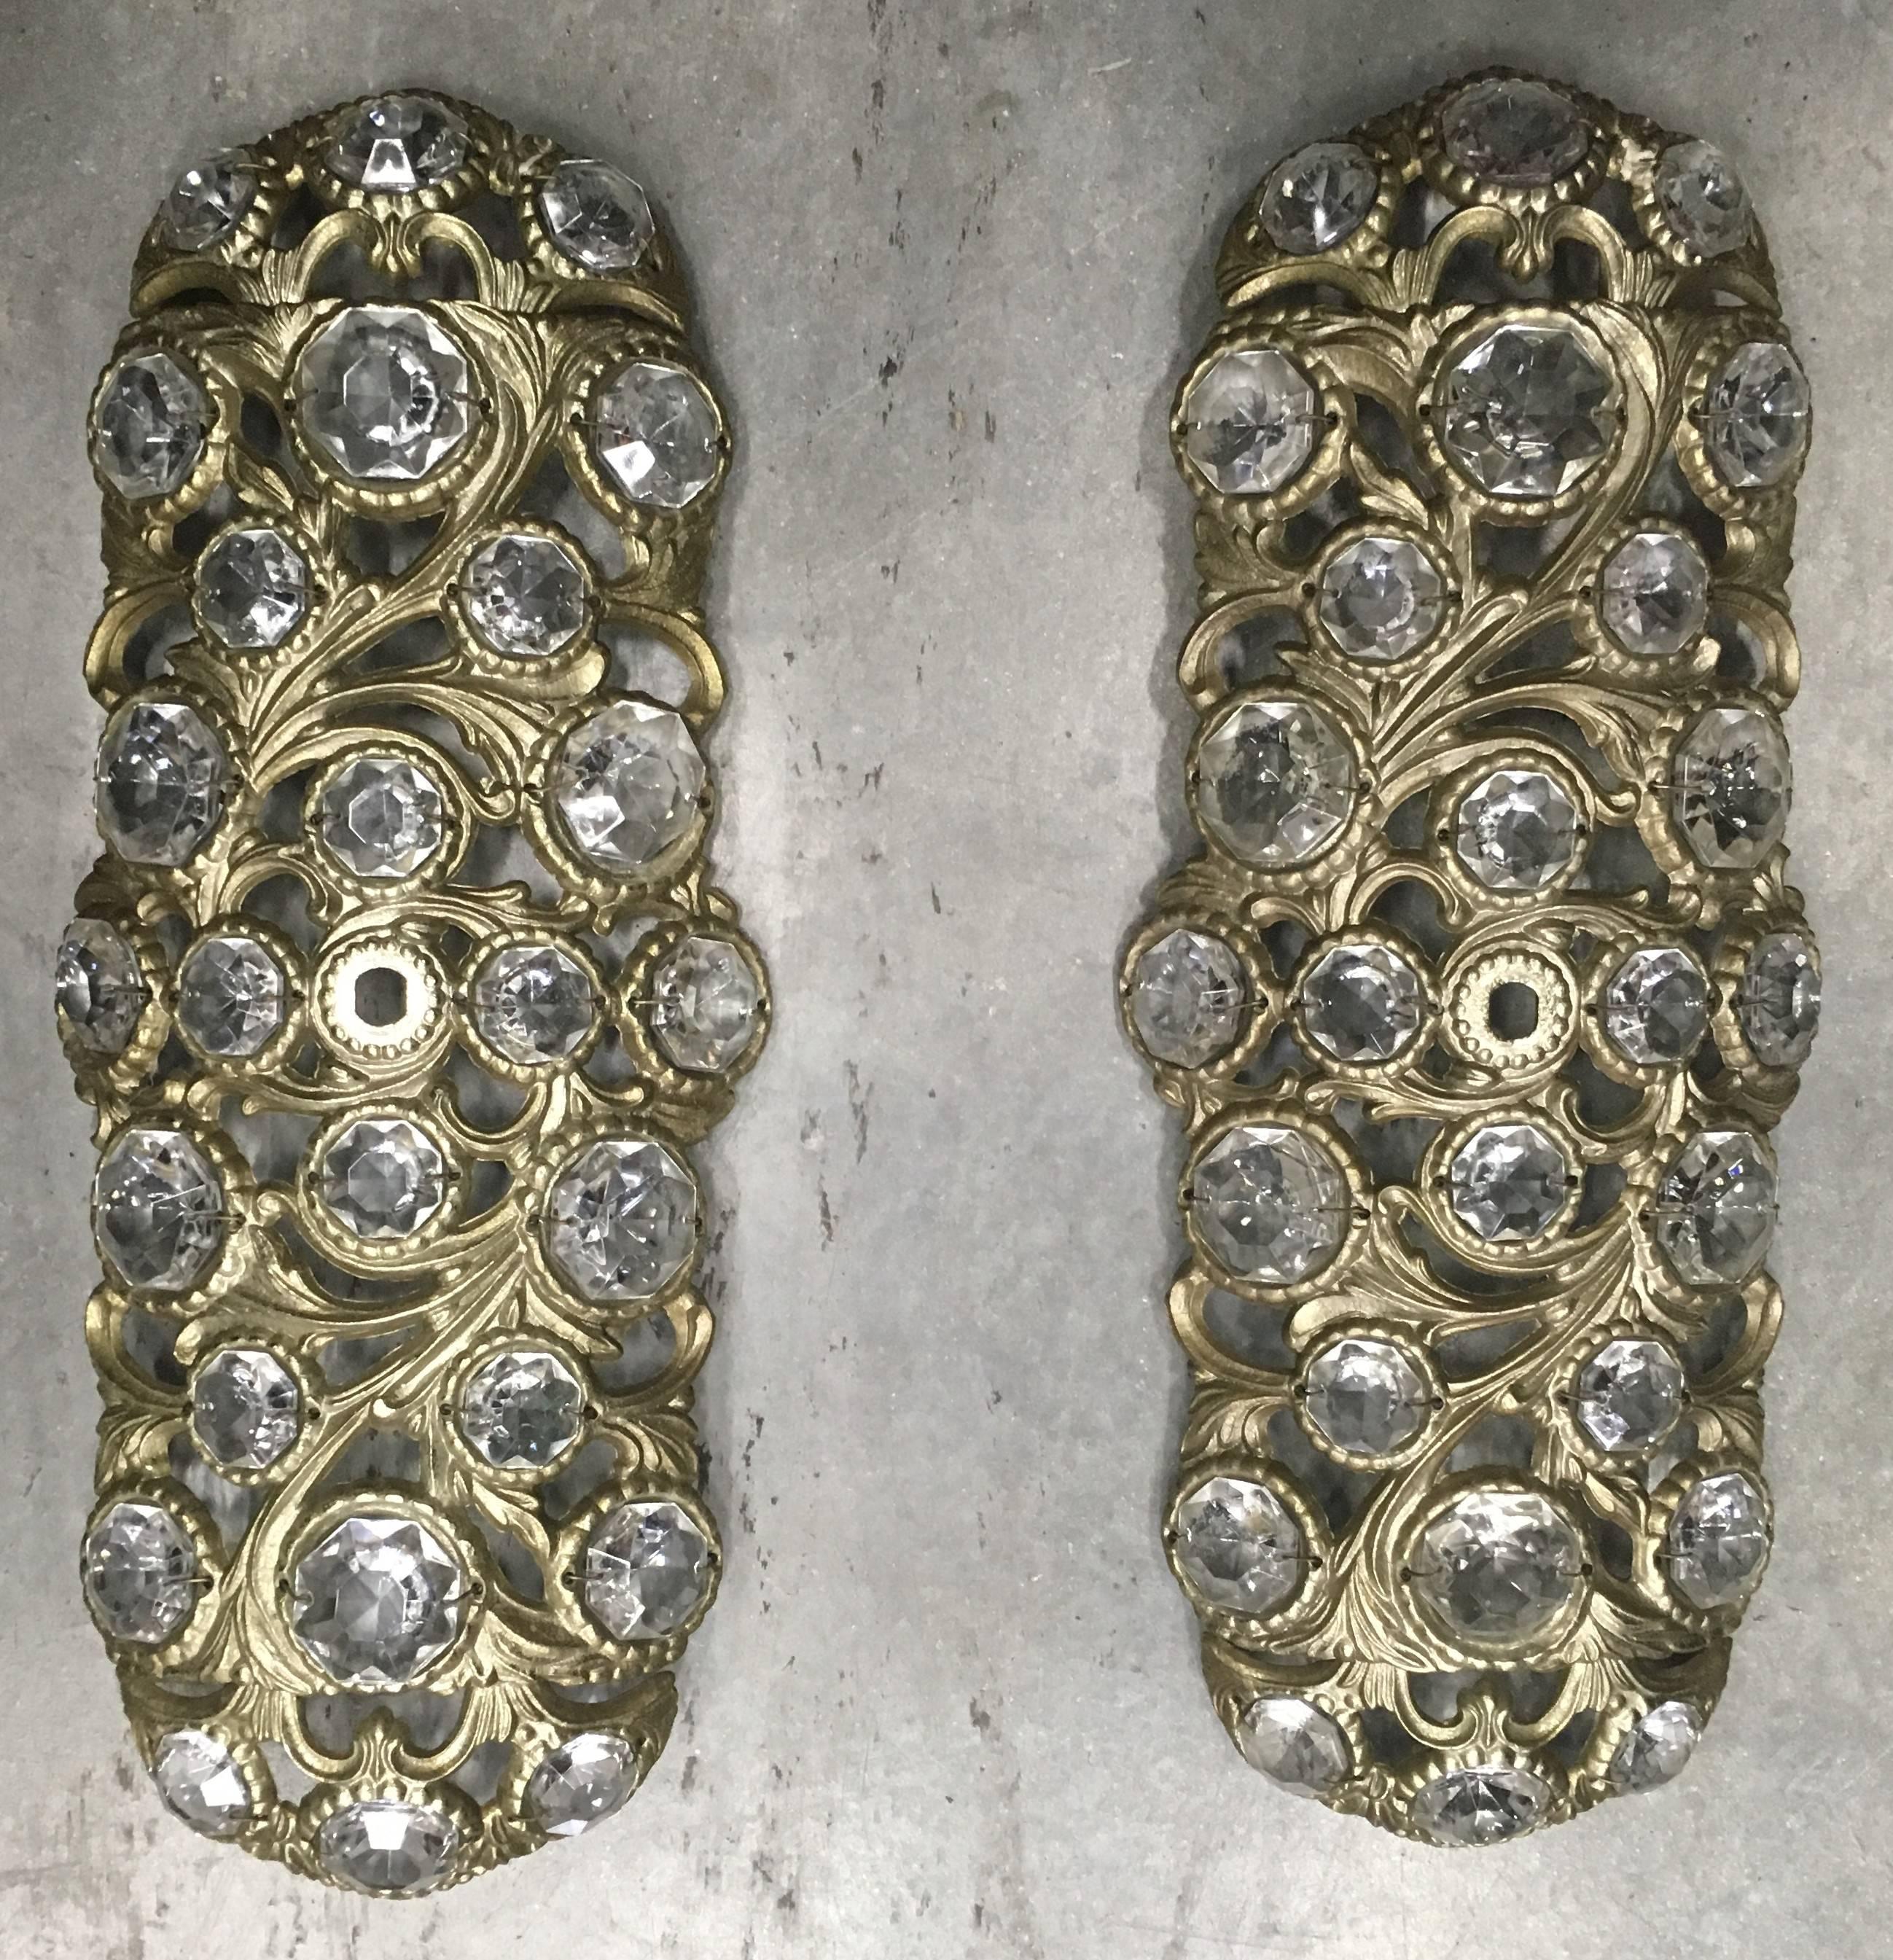 Pair of 1970s Italian bronze sconces embellished with crystals. It needs wiring.